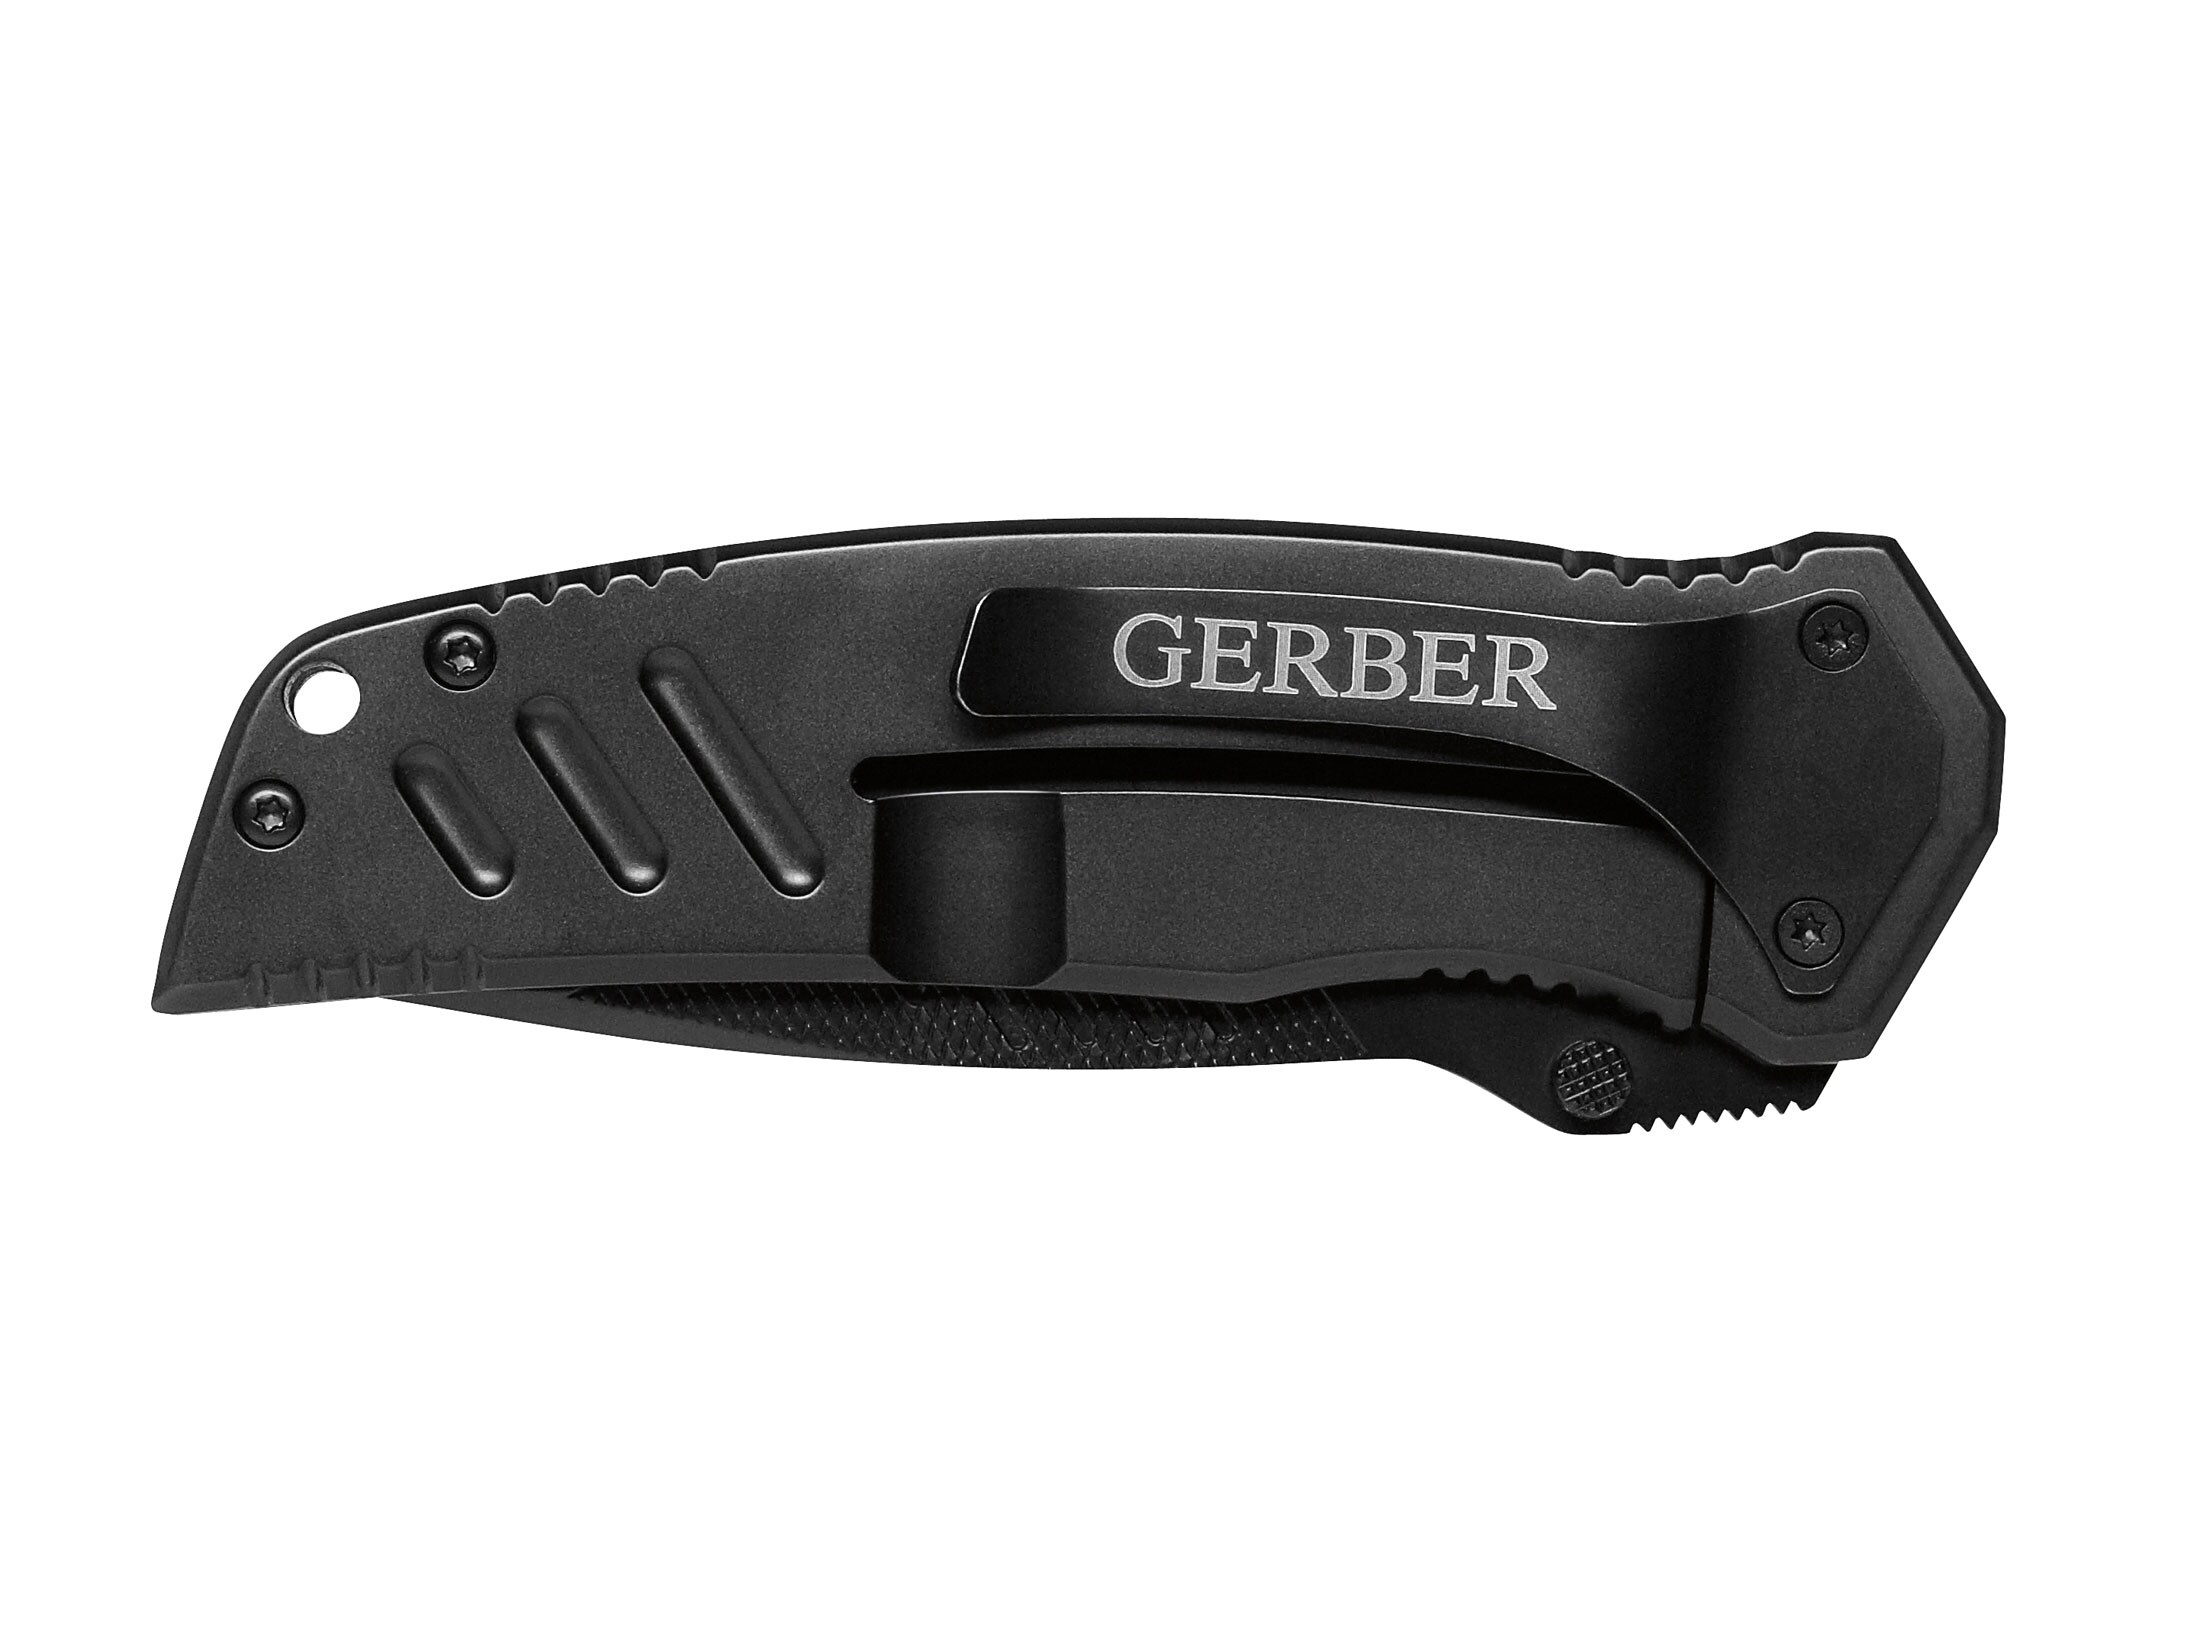 Gerber Swagger Folding Pocket Knife 3.31″ Serrated Drop Point 7Cr17MoV Titanium Nitride Coated Stainless Steel Blade G-10 Handle Black For Sale